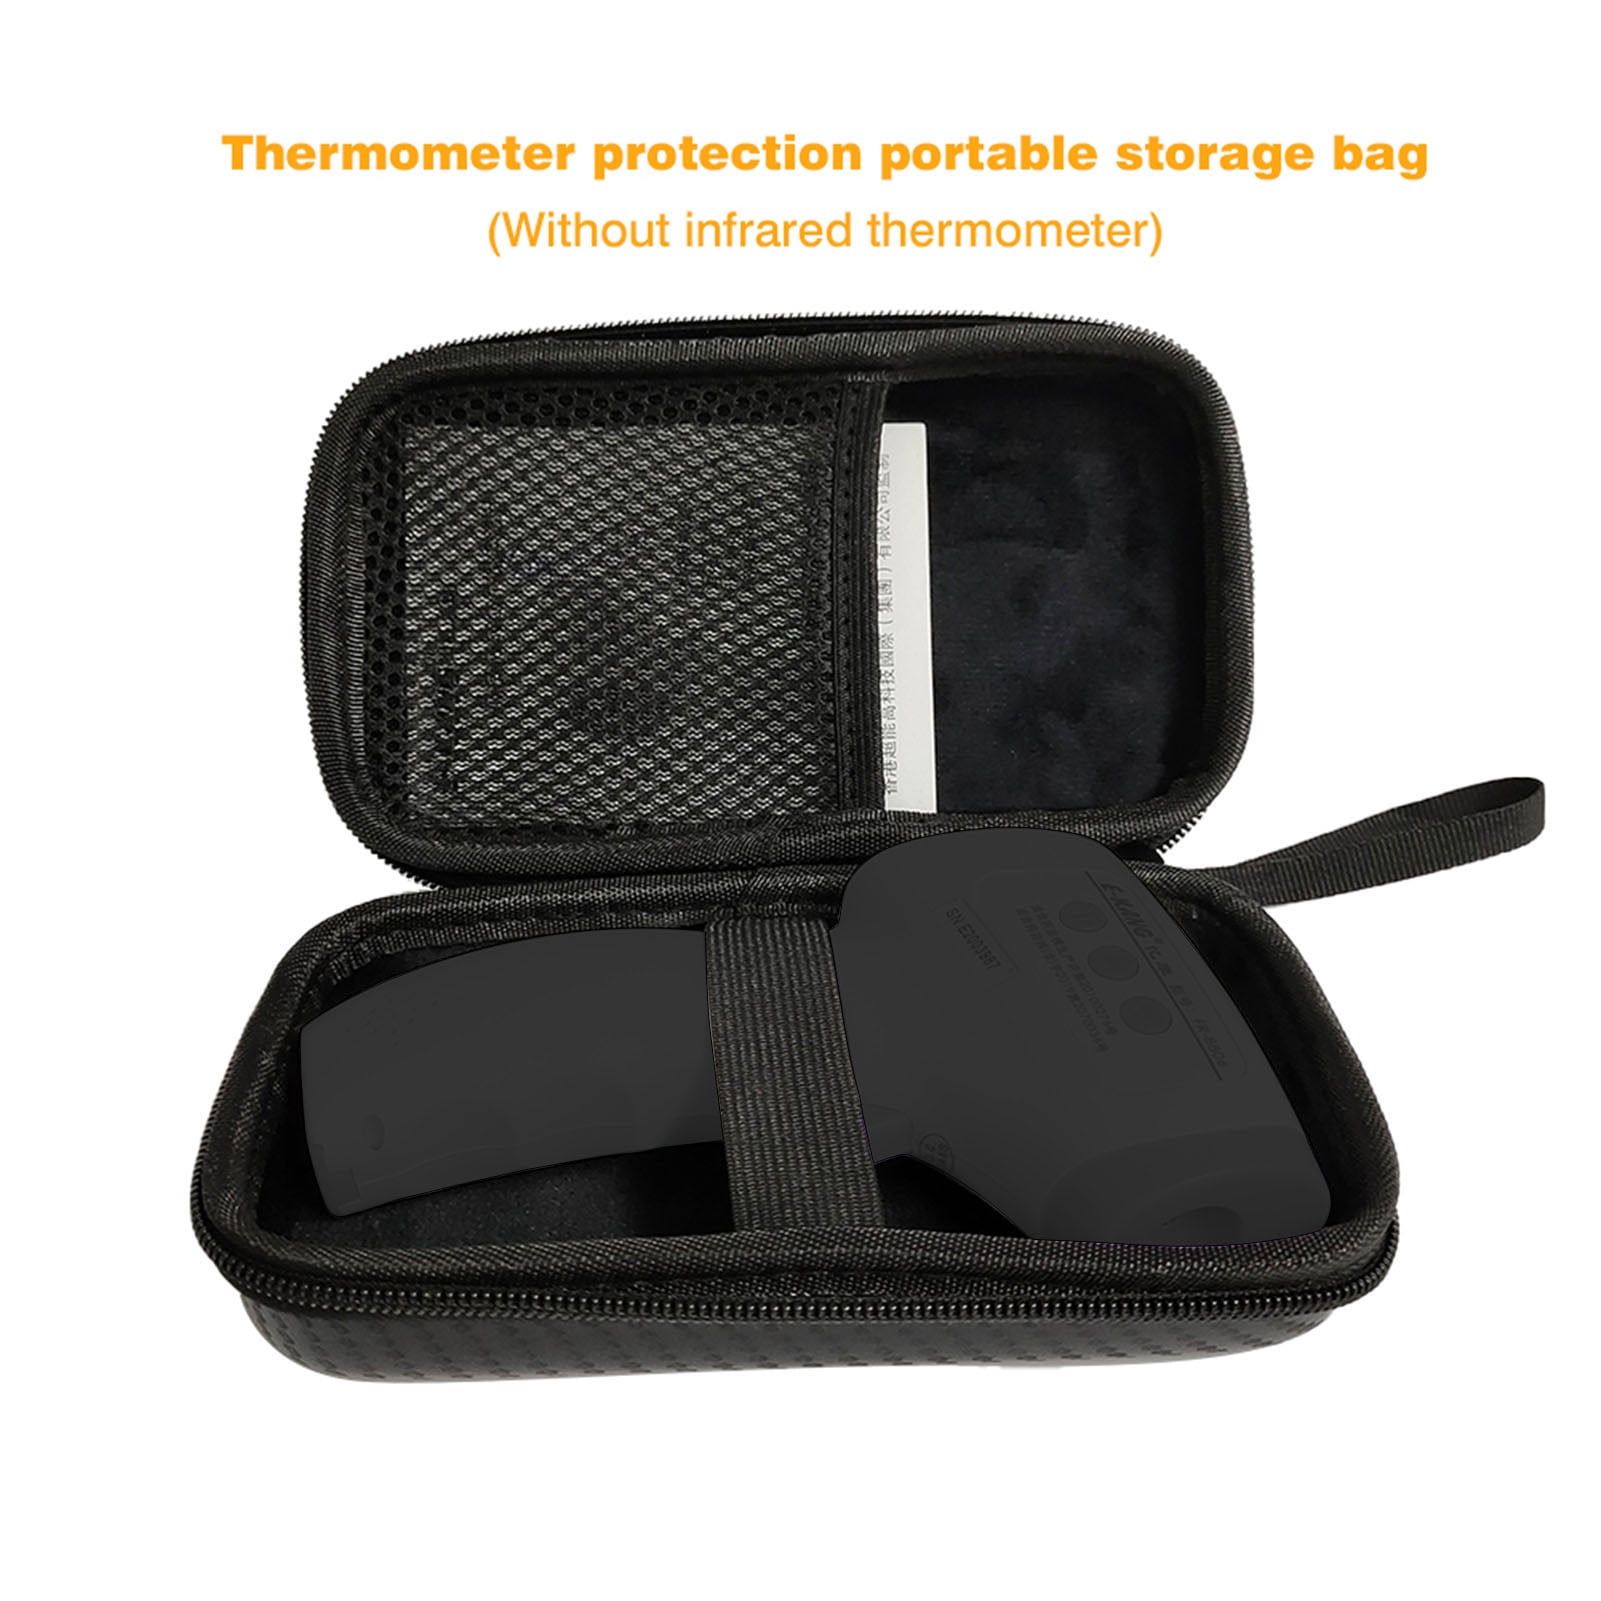 carrie-ful Forehead Thermometer Storage Bag Portable Box Case for Thermometer Eva Hard Bag Travel Protective Carrying Storage Cover Pretty Well 